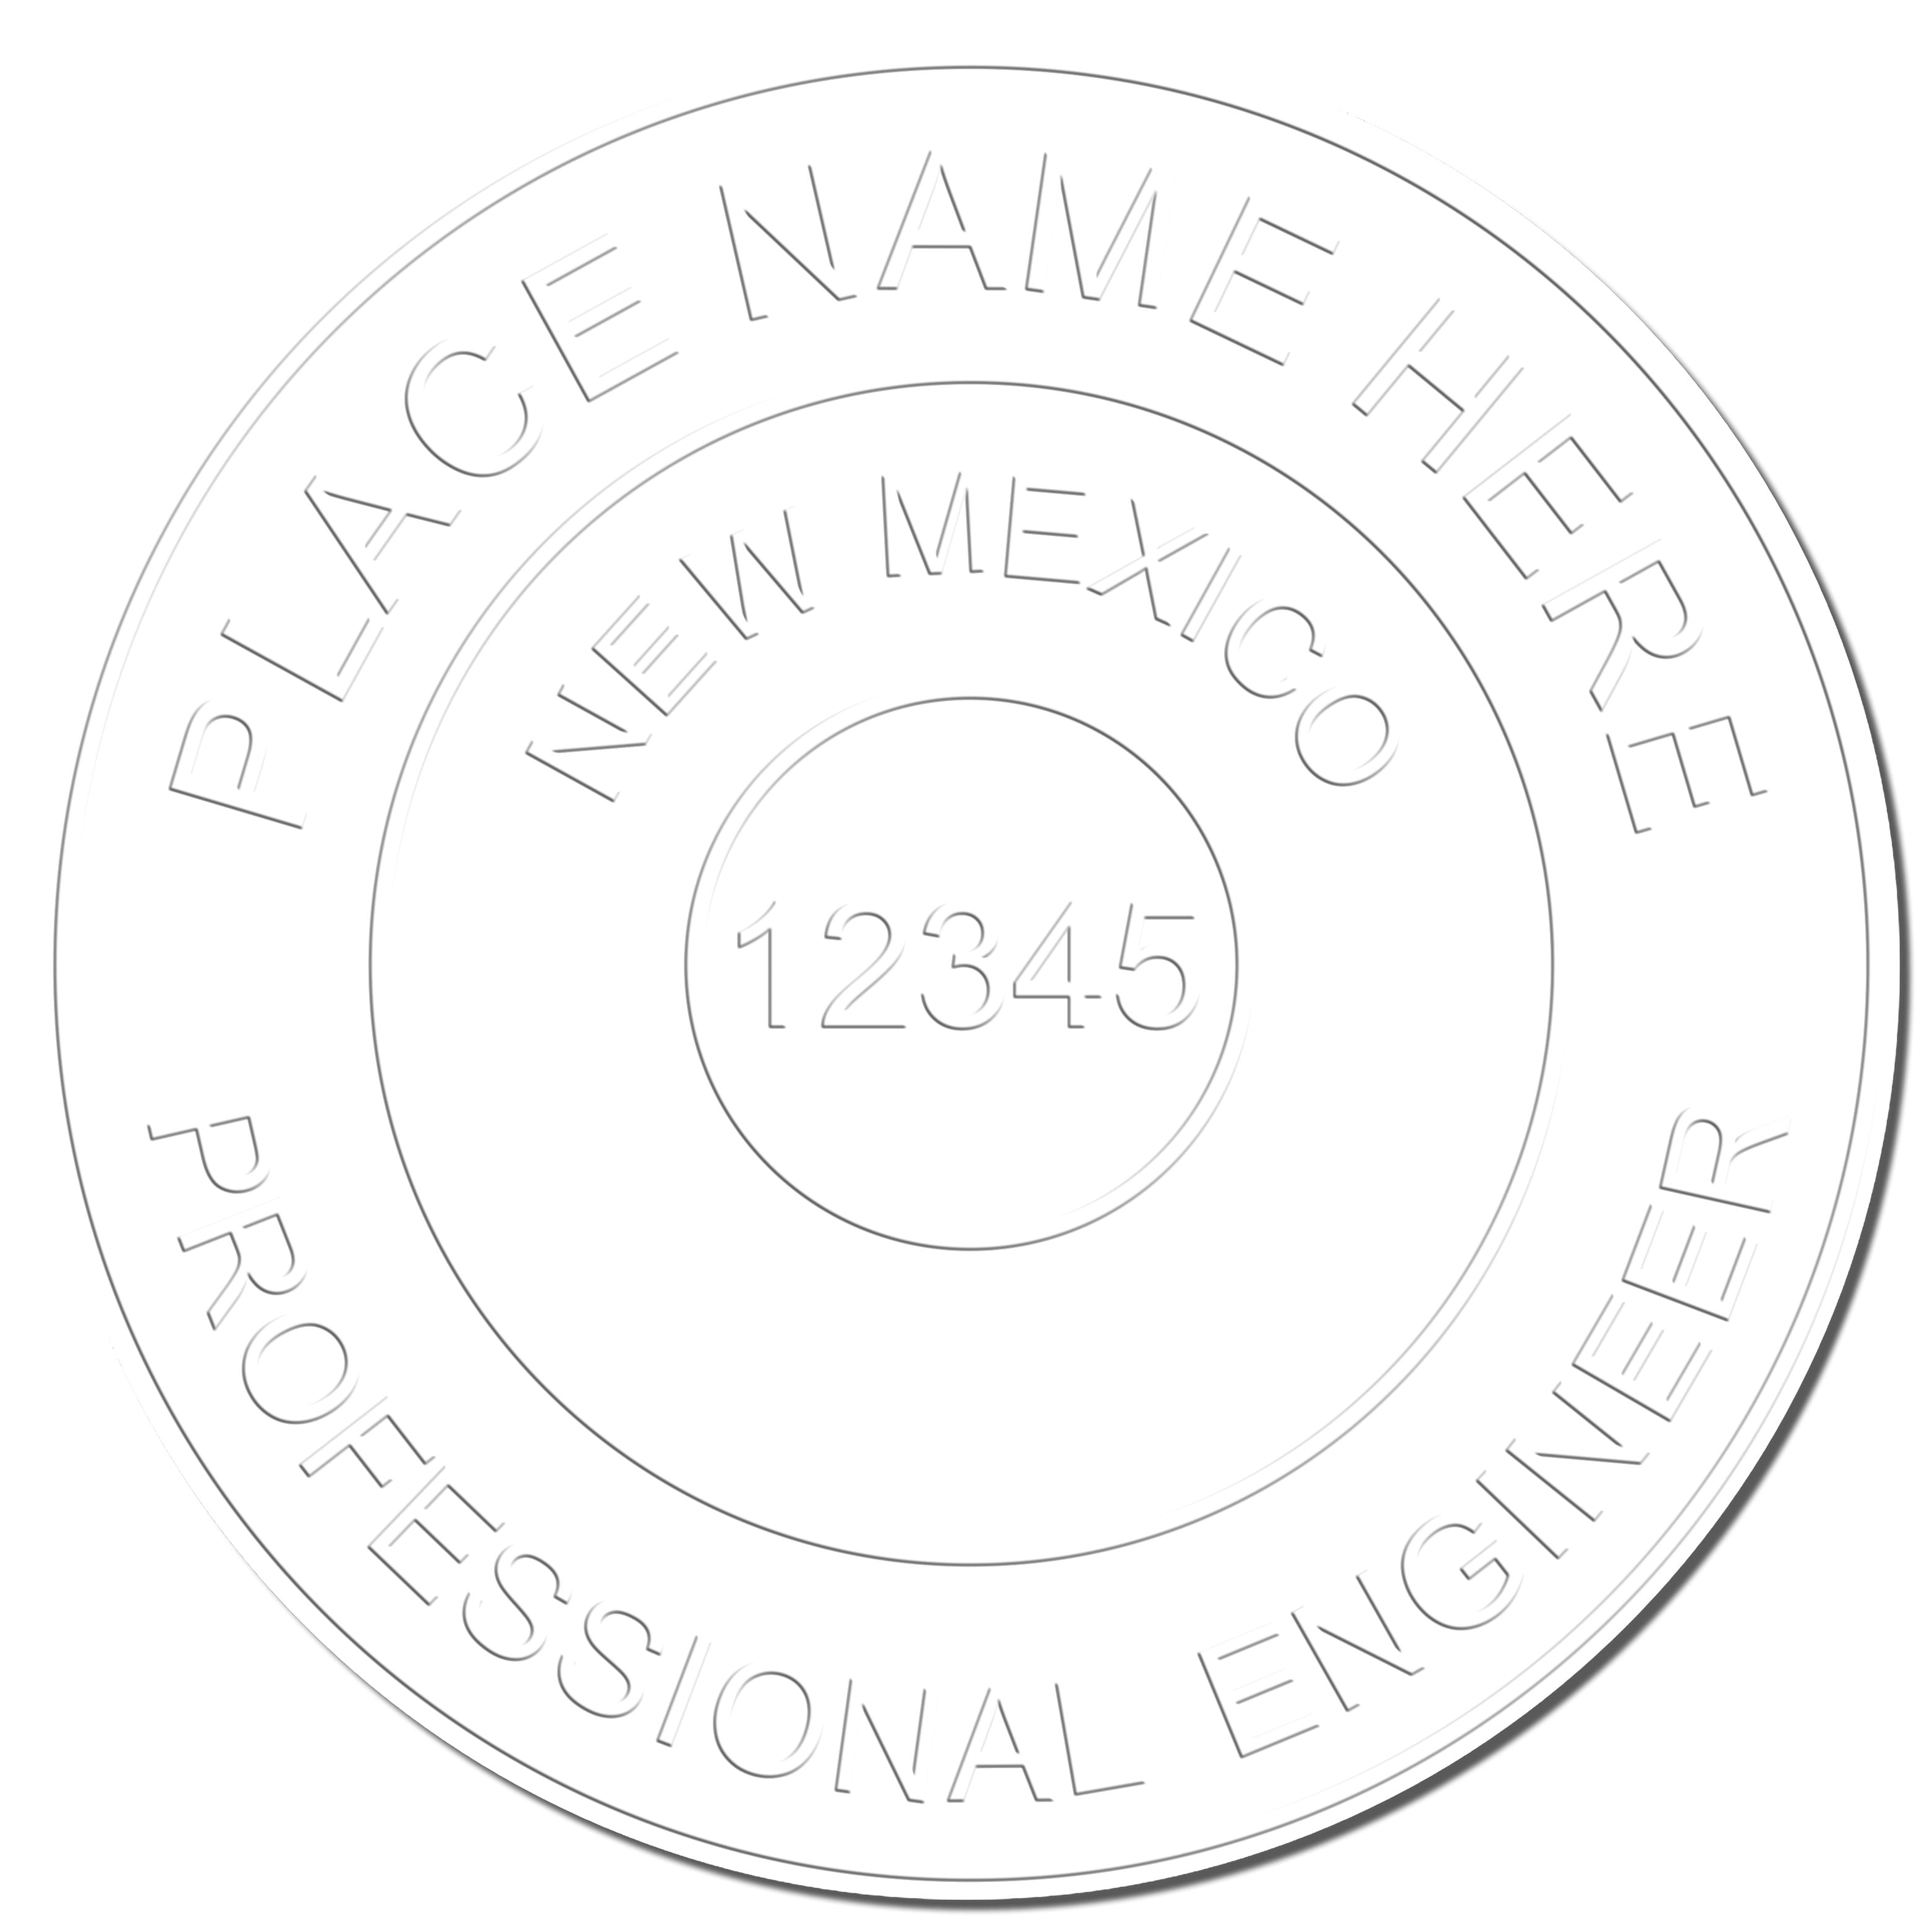 This paper is stamped with a sample imprint of the Hybrid New Mexico Engineer Seal, signifying its quality and reliability.